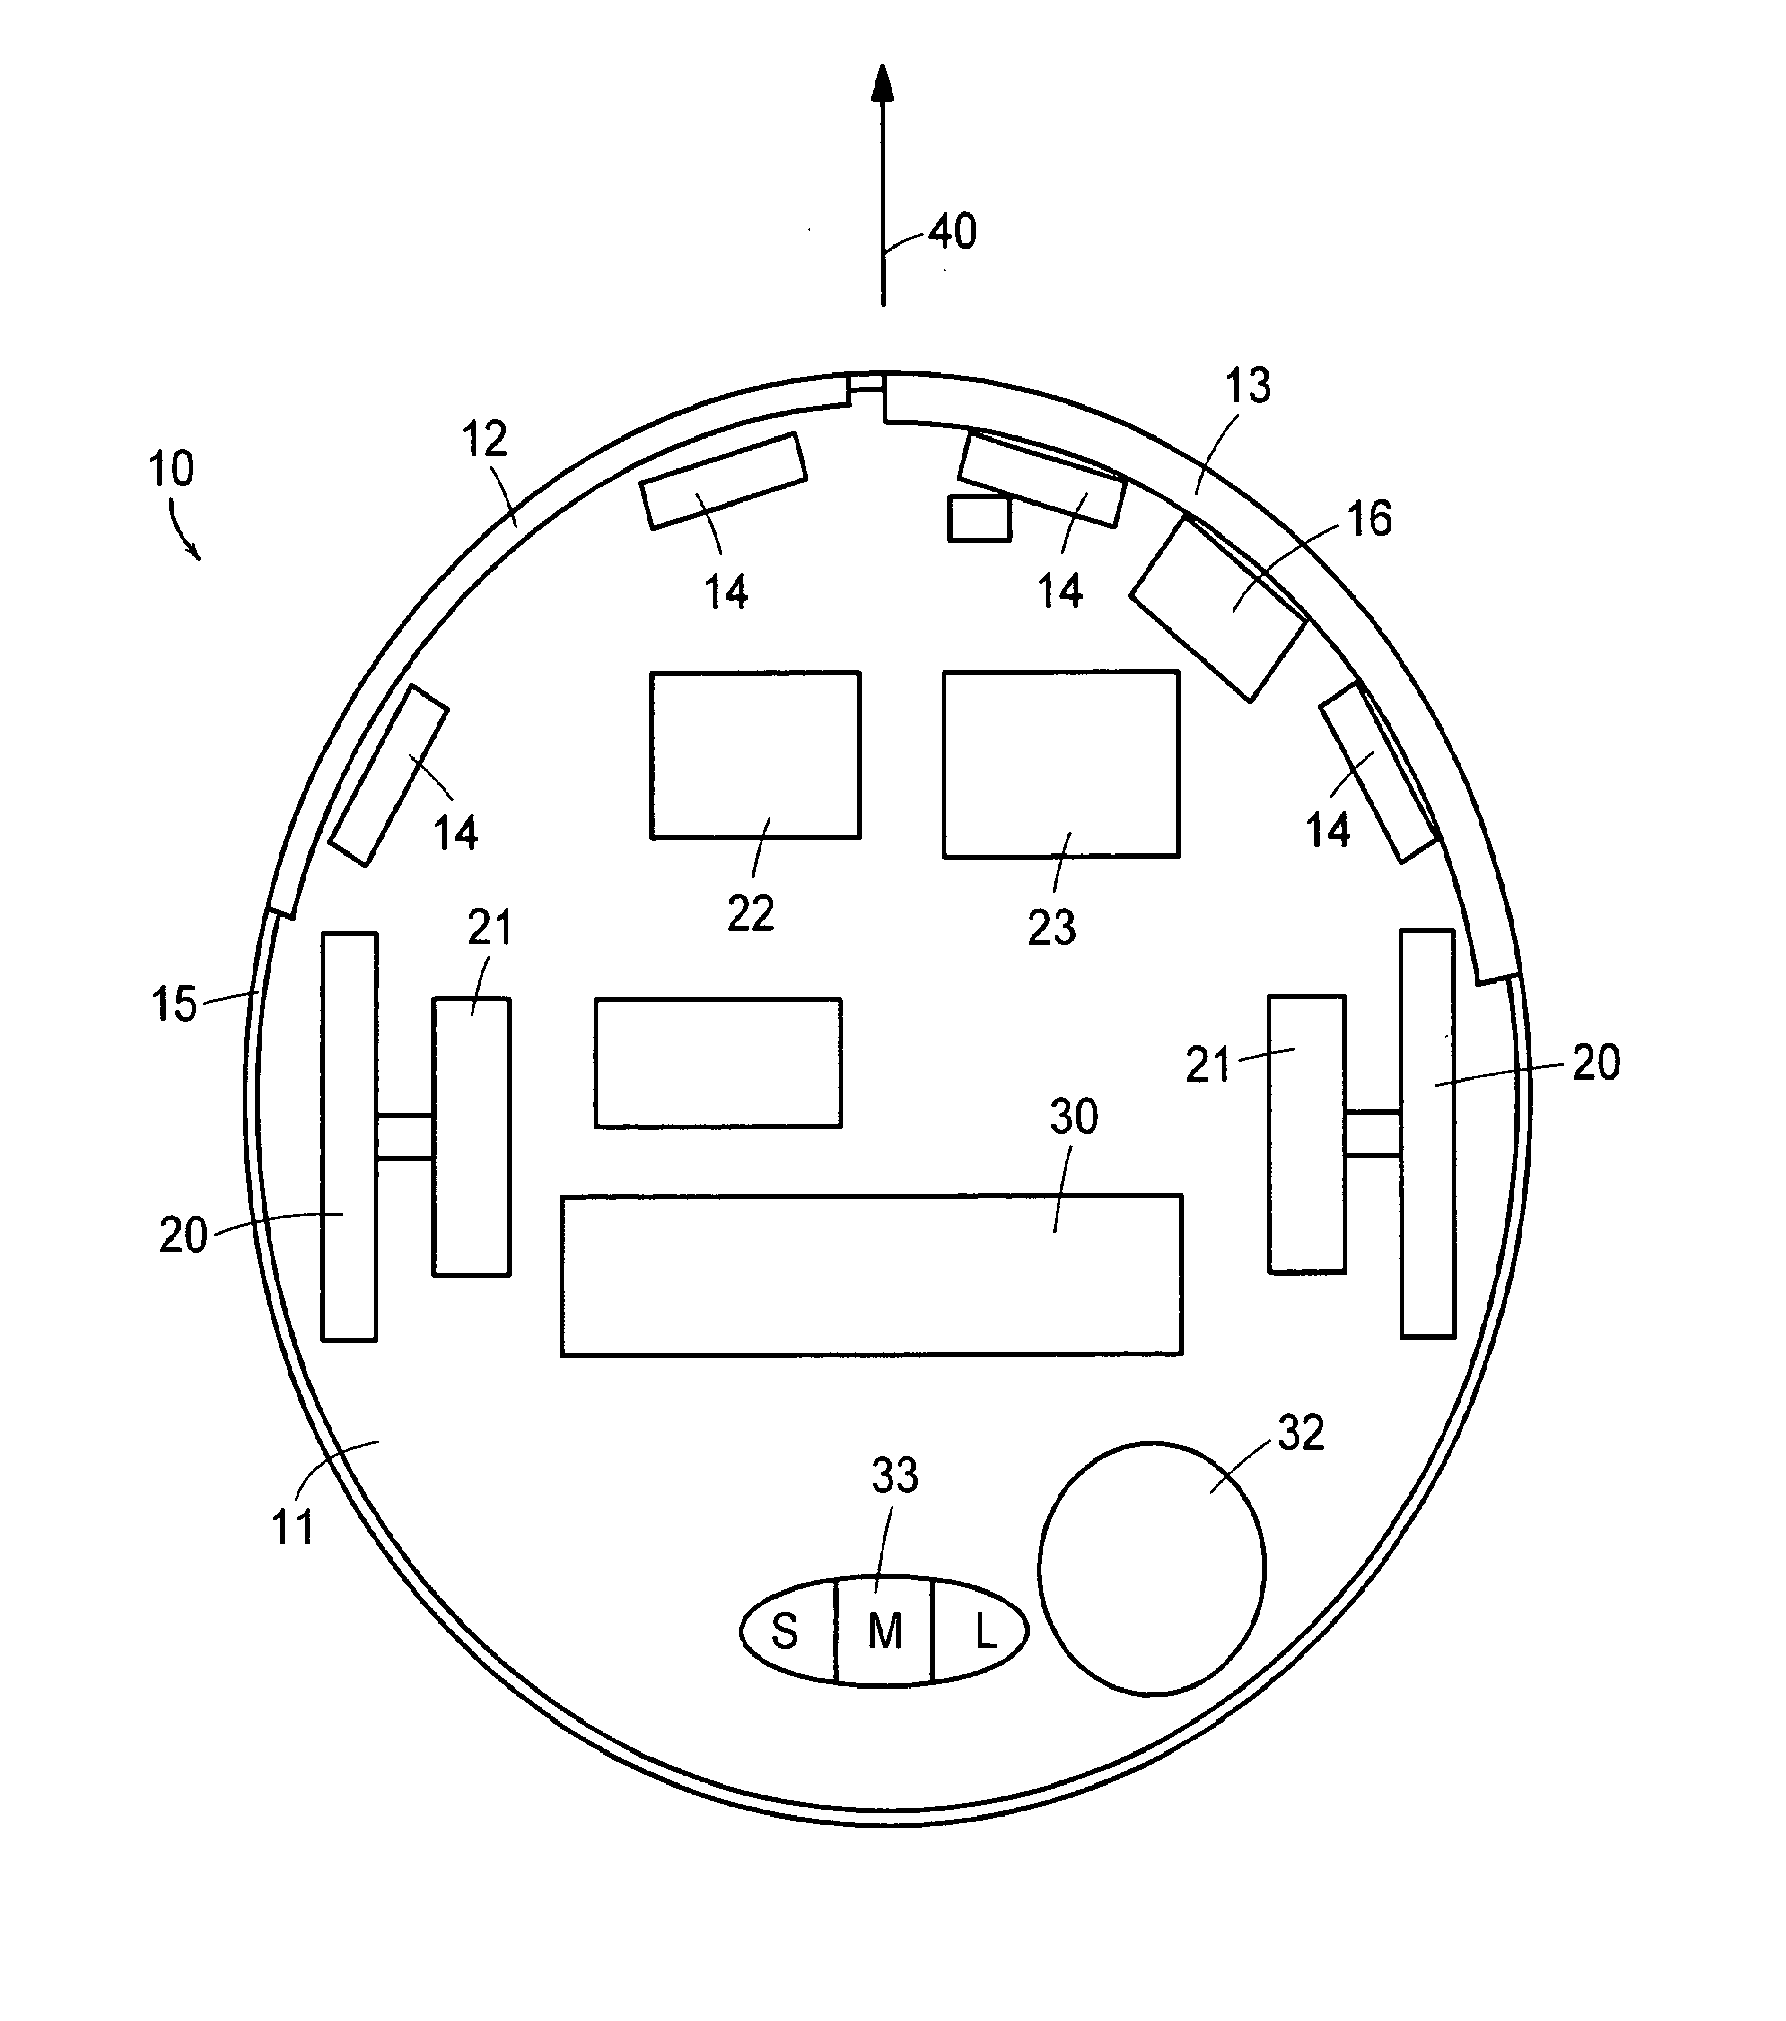 Method and system for multi-mode coverage for an autonomous robot